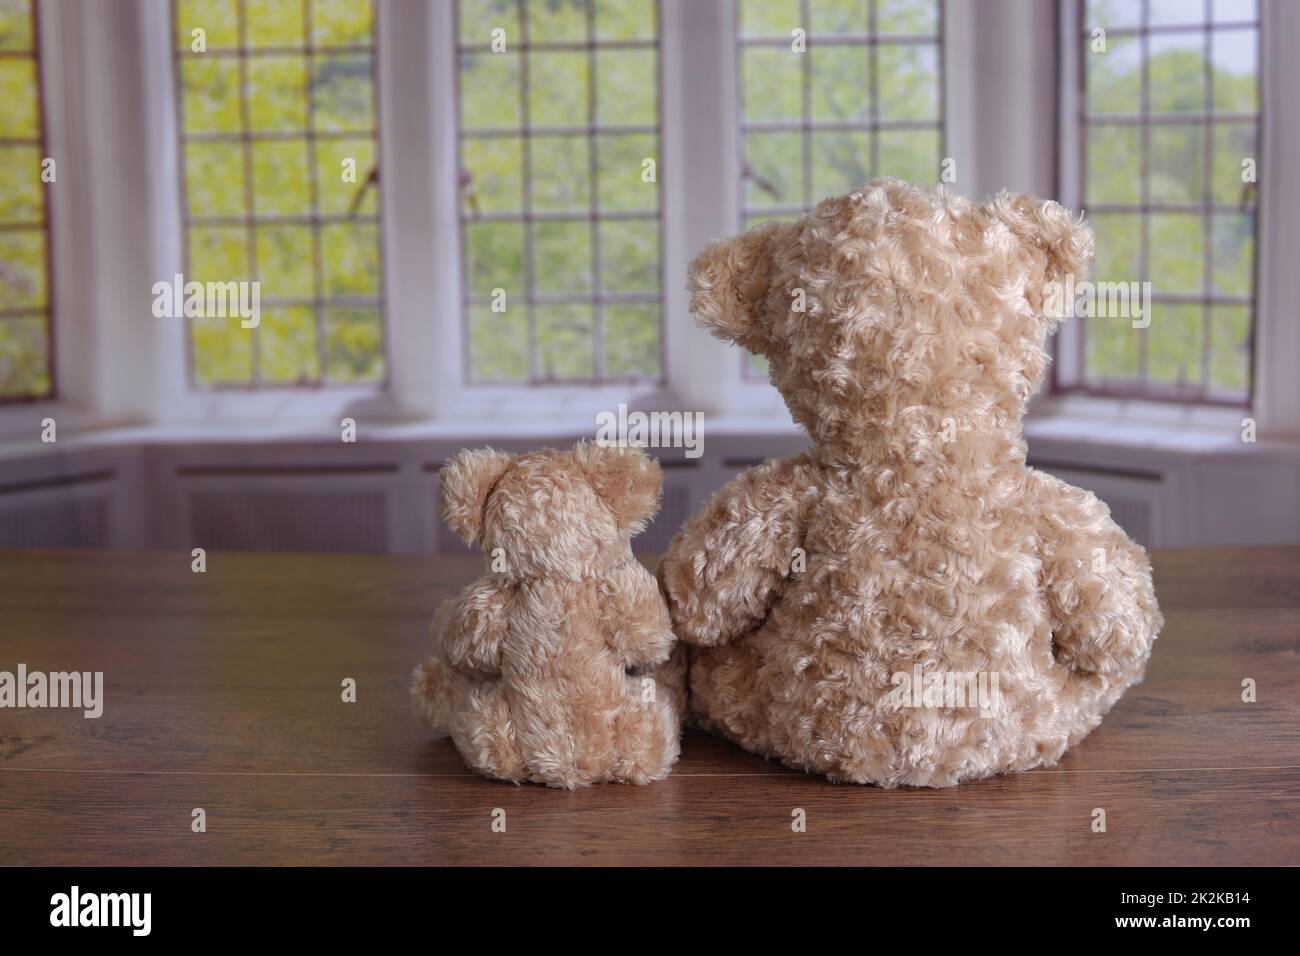 Parenting friendship bonding concept two teddy bears sitting together Stock Photo